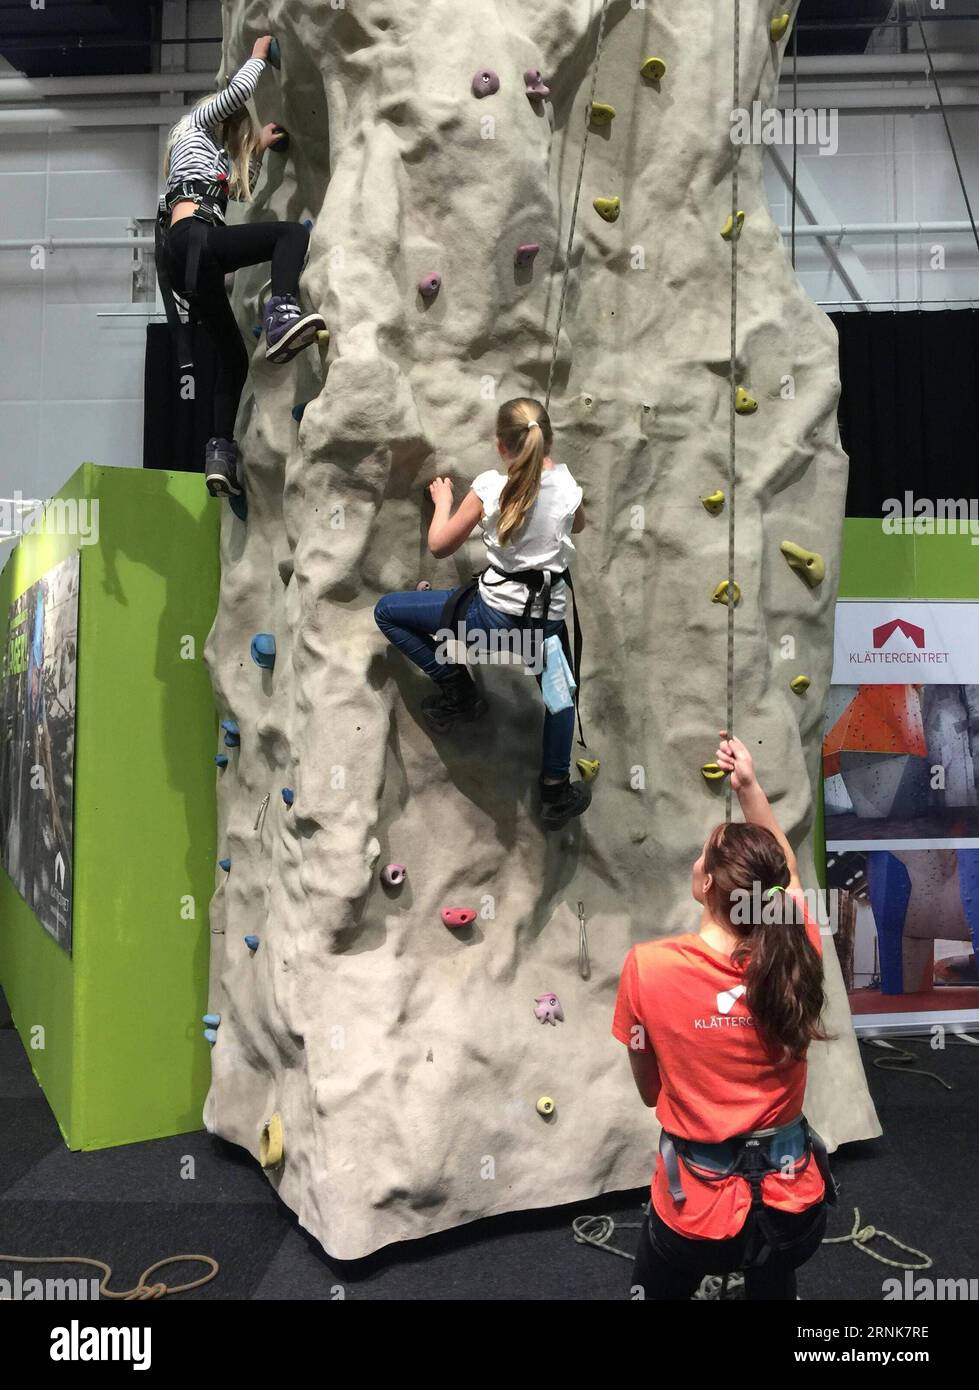 STOCKHOLM, Swedes experience rock climbing at the 2017 Swedish Outdoor Show in Stockholm, capital of Sweden, on March 11, 2017. The show, held from March 10 to March 12, is expected to attract more than 30,000 active outdoor people with a wide range of different interests and levels of experience. ) SWEDEN-STOCKHOLM-2017 SWEDISH OUTDOOR SHOW FuxYiming PUBLICATIONxNOTxINxCHN   Stockholm swedes Experience Rock Climbing AT The 2017 Swedish Outdoor Show in Stockholm Capital of Sweden ON March 11 2017 The Show Hero from March 10 to March 12 IS expected to attract More than 30 000 Active Outdoor Cel Stock Photo